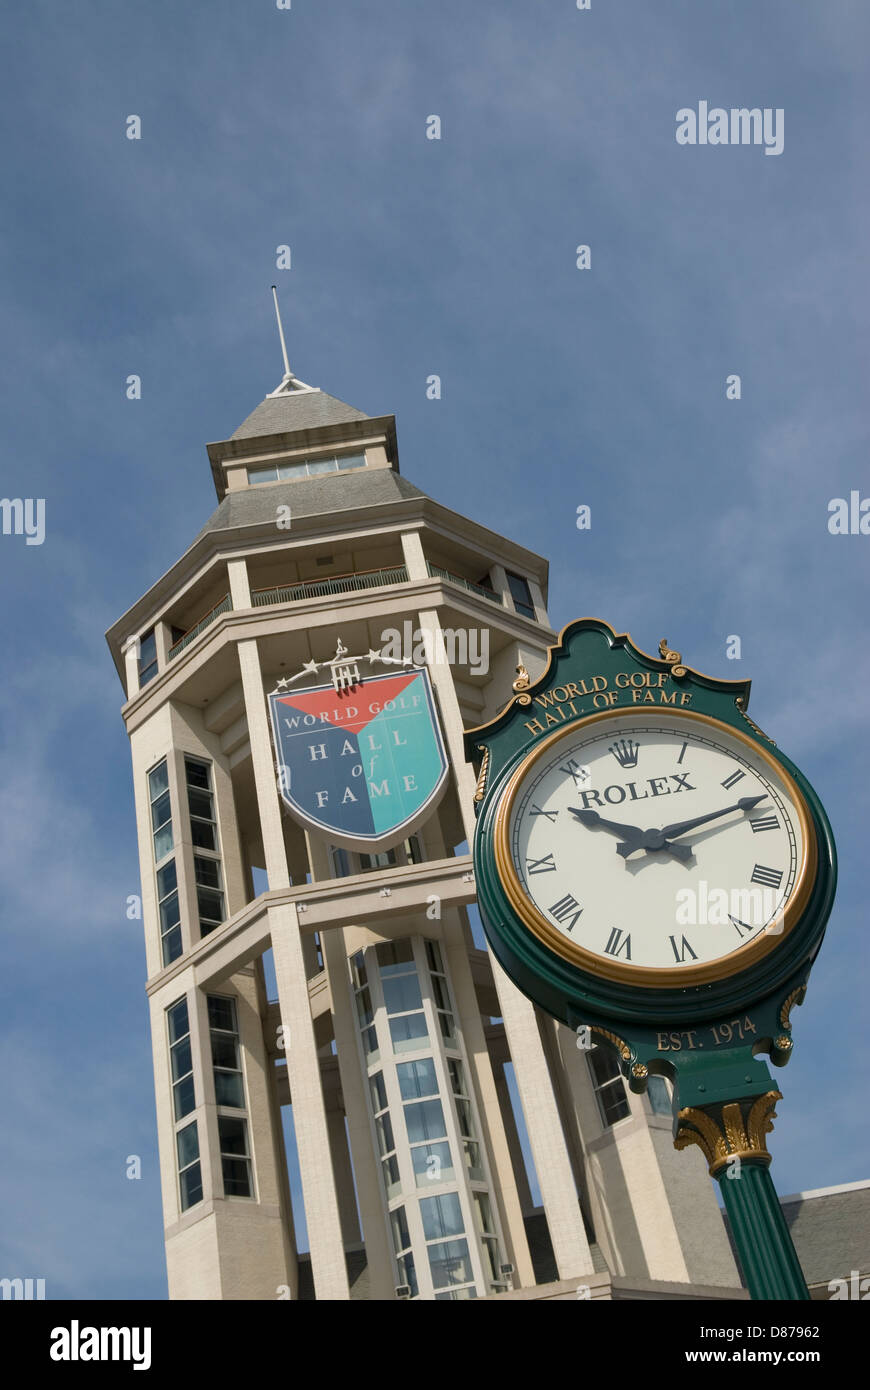 World Golf Hall of Fame Rolex Clock and Tower in St. Augustine, Florida, USA. Stock Photo